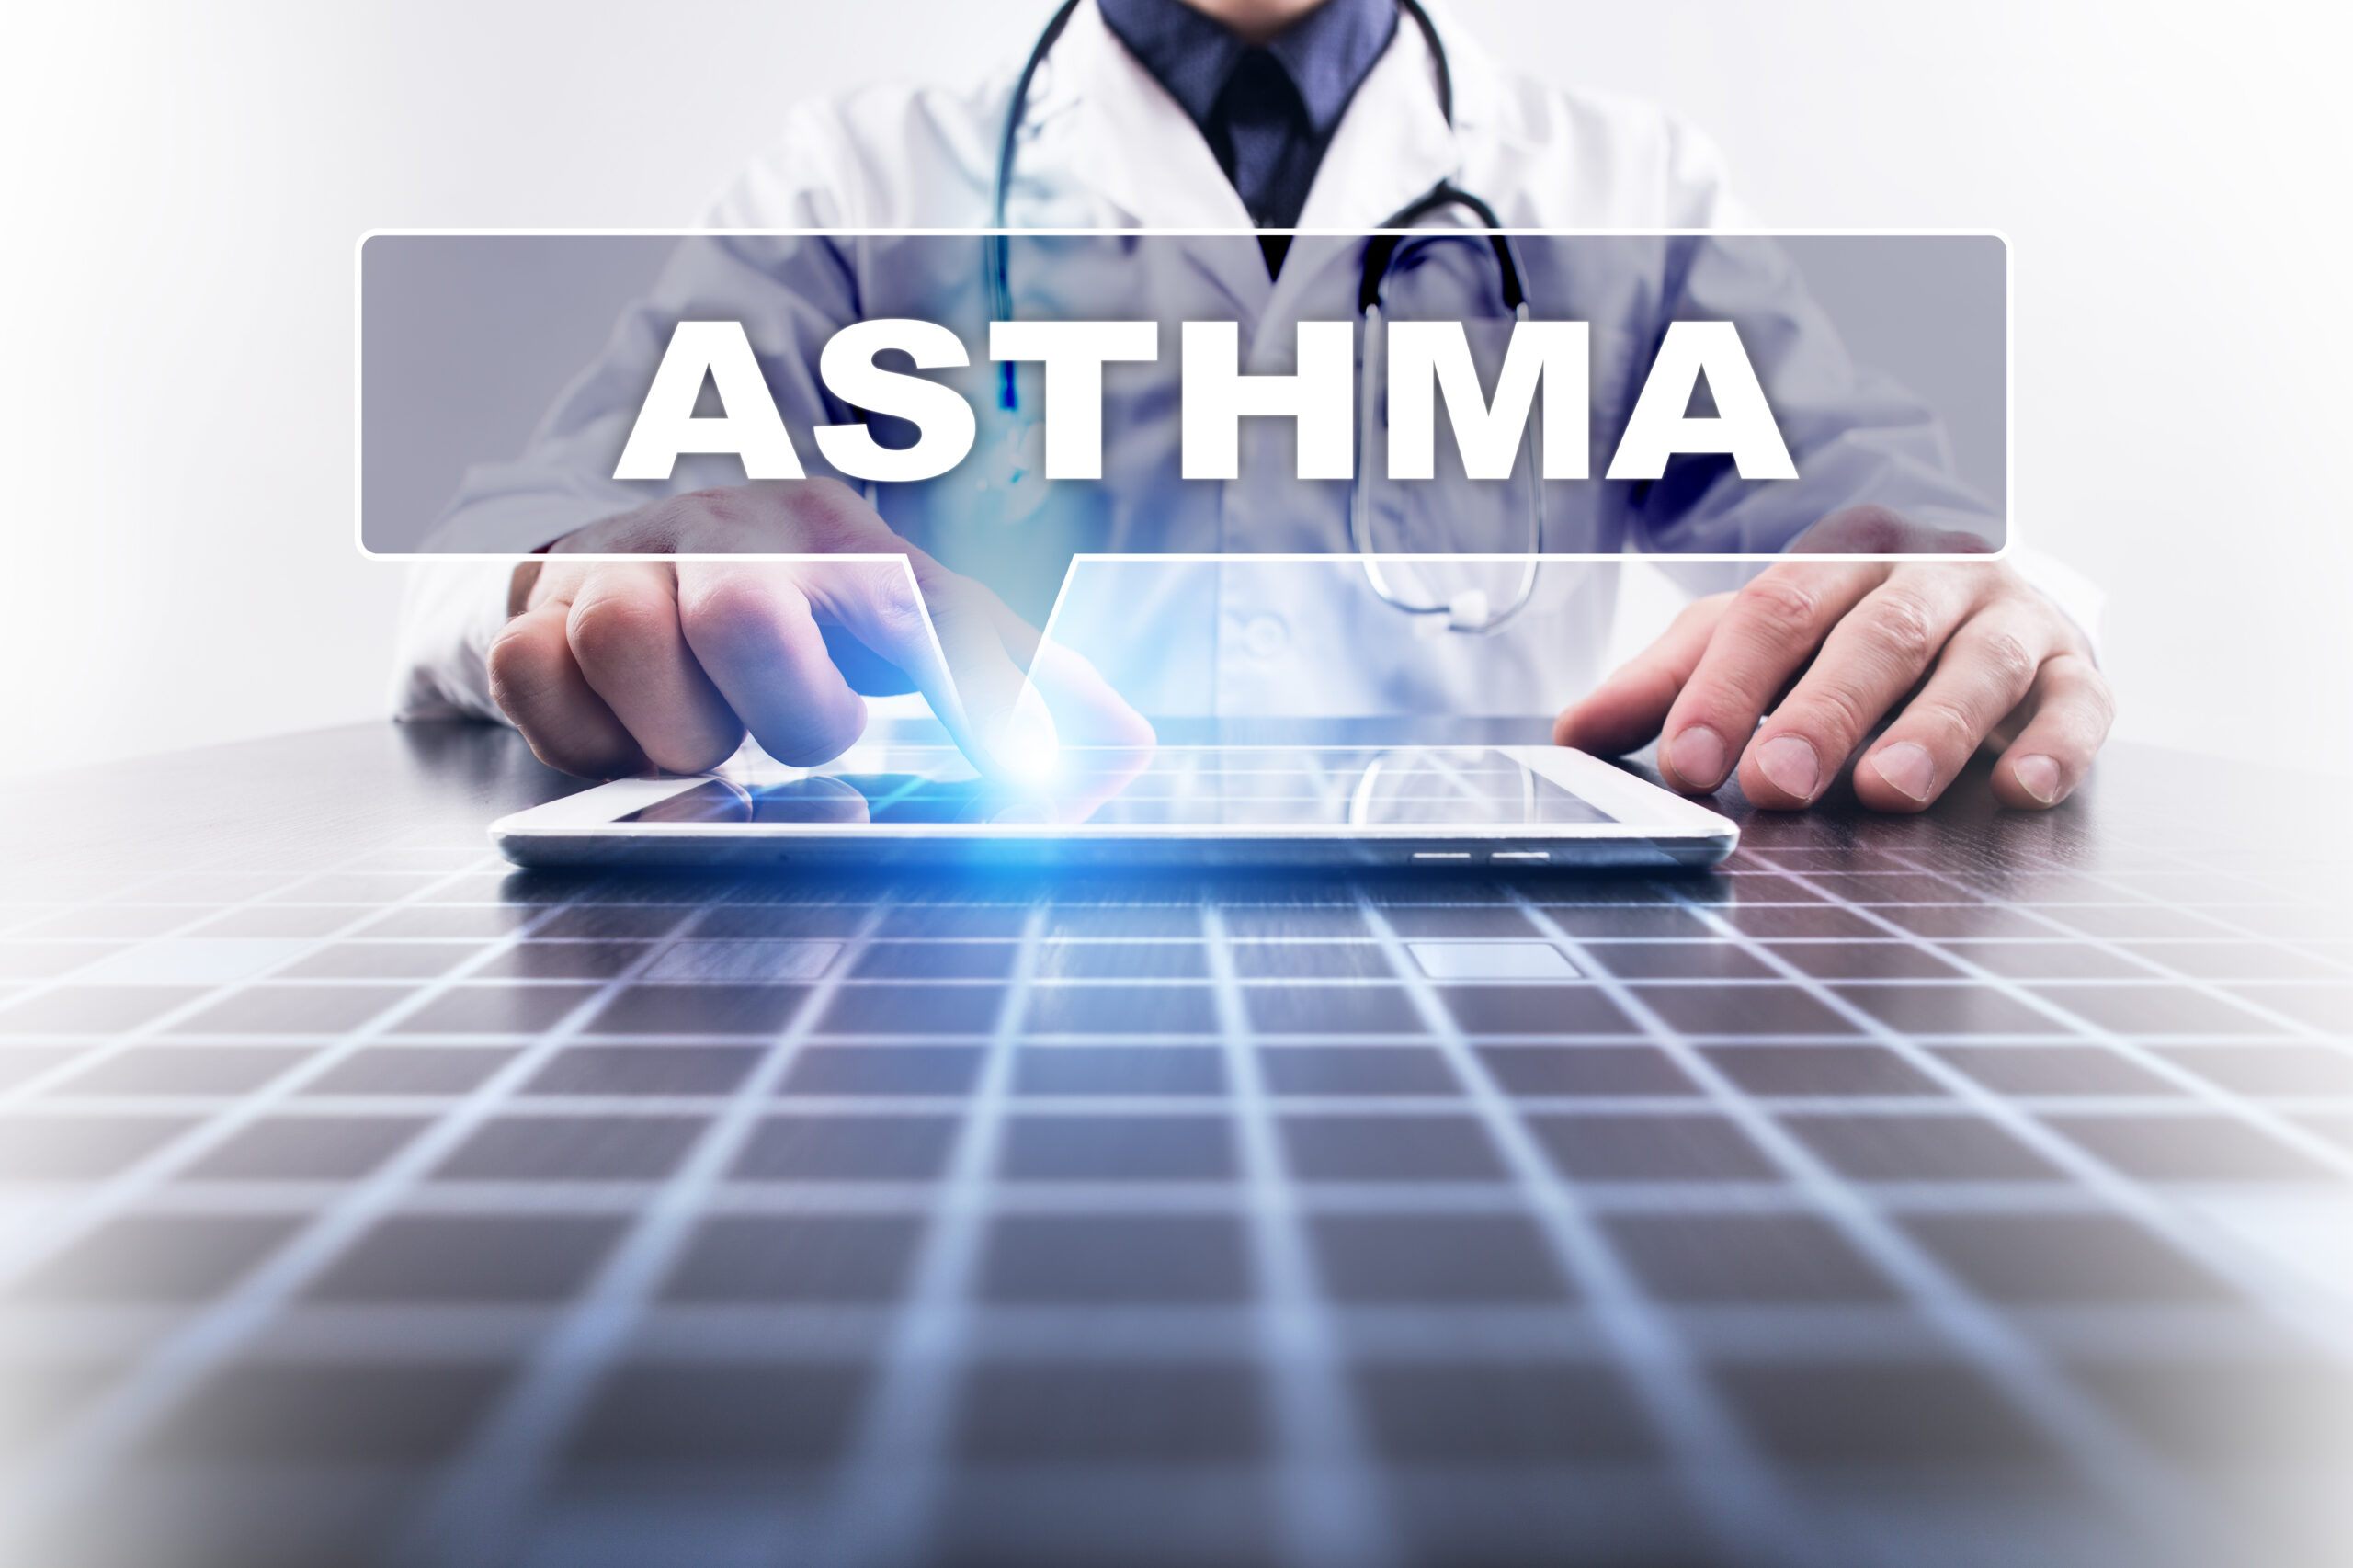 5 New Regions of the Genome that Increase Risk of Asthma Discovered